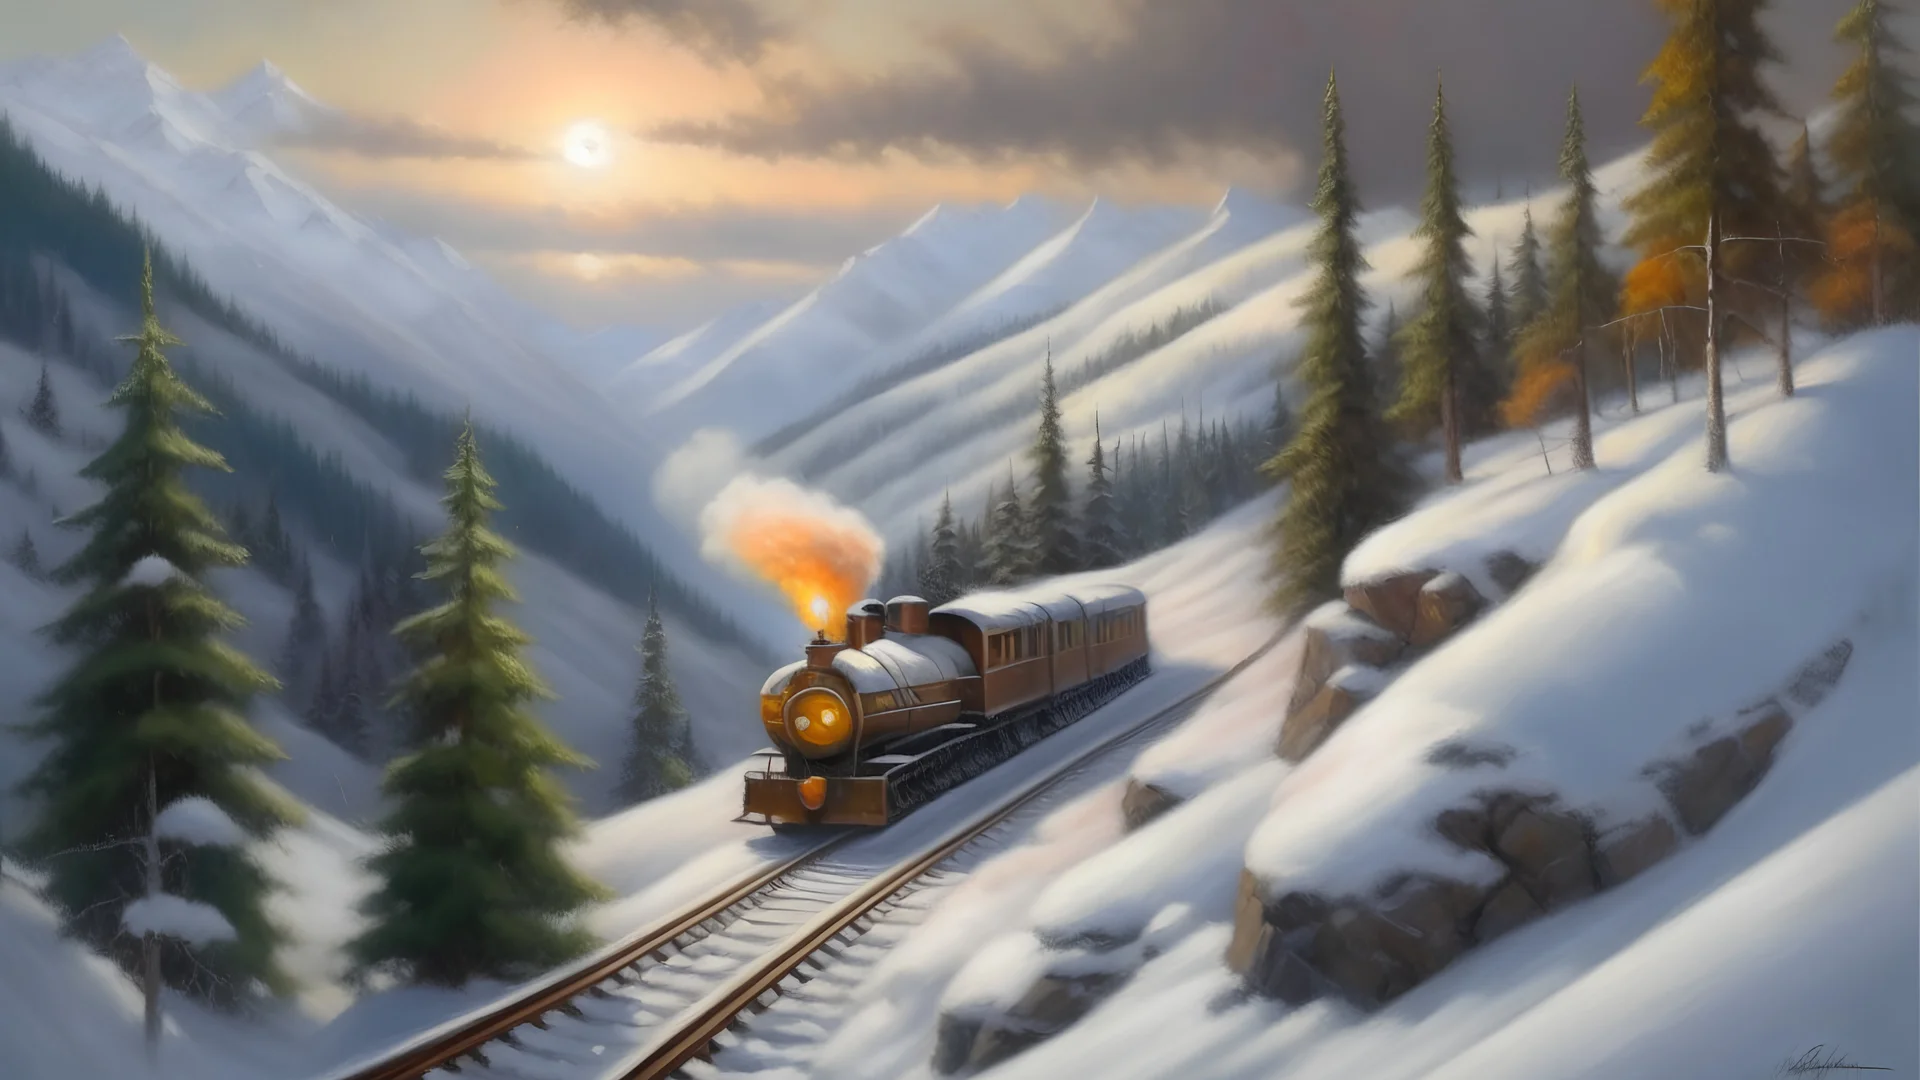 realistic oil painting of a train on a snowy mountain road, inspired by the works of Thomas Moran and Frederic Edwin Church, detailed landscape with trees and mountains in the background, soft lighting to create a sense of depth and movement, vibrant colors contrasting against the white snow.